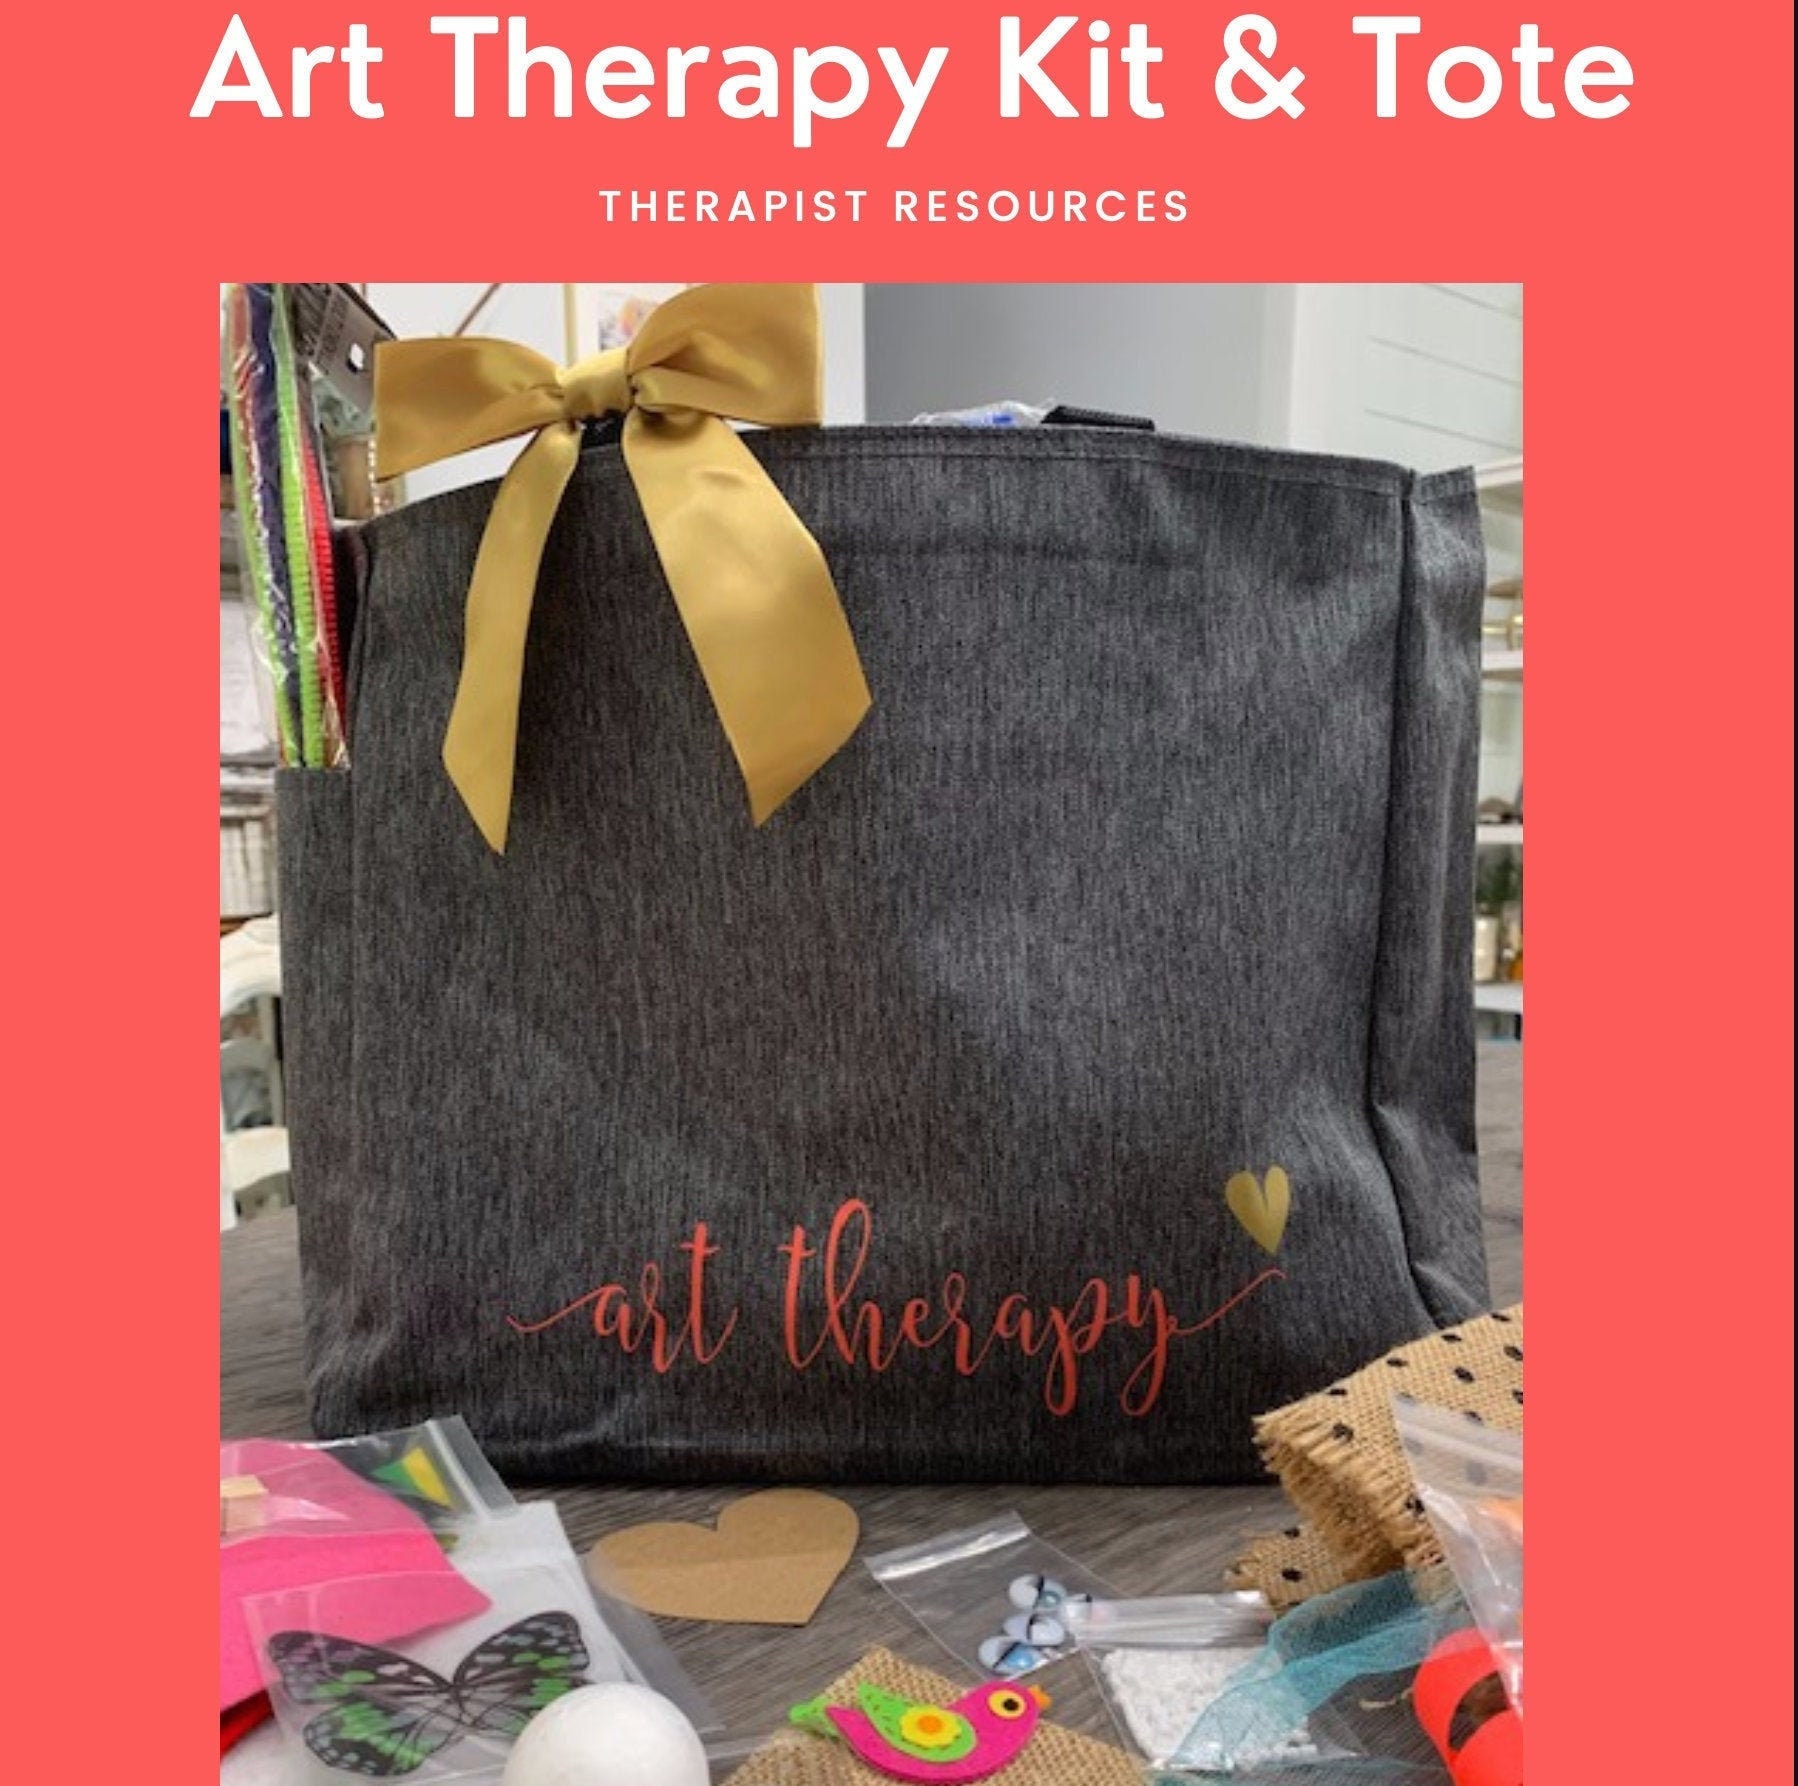 OEFY Art Therapy Kit: 20+ Expressive Art Therapy Activities, Anxiety Tools,  Coping Skills, Art Therapy Supplies, Therapist Tools for Mental Health